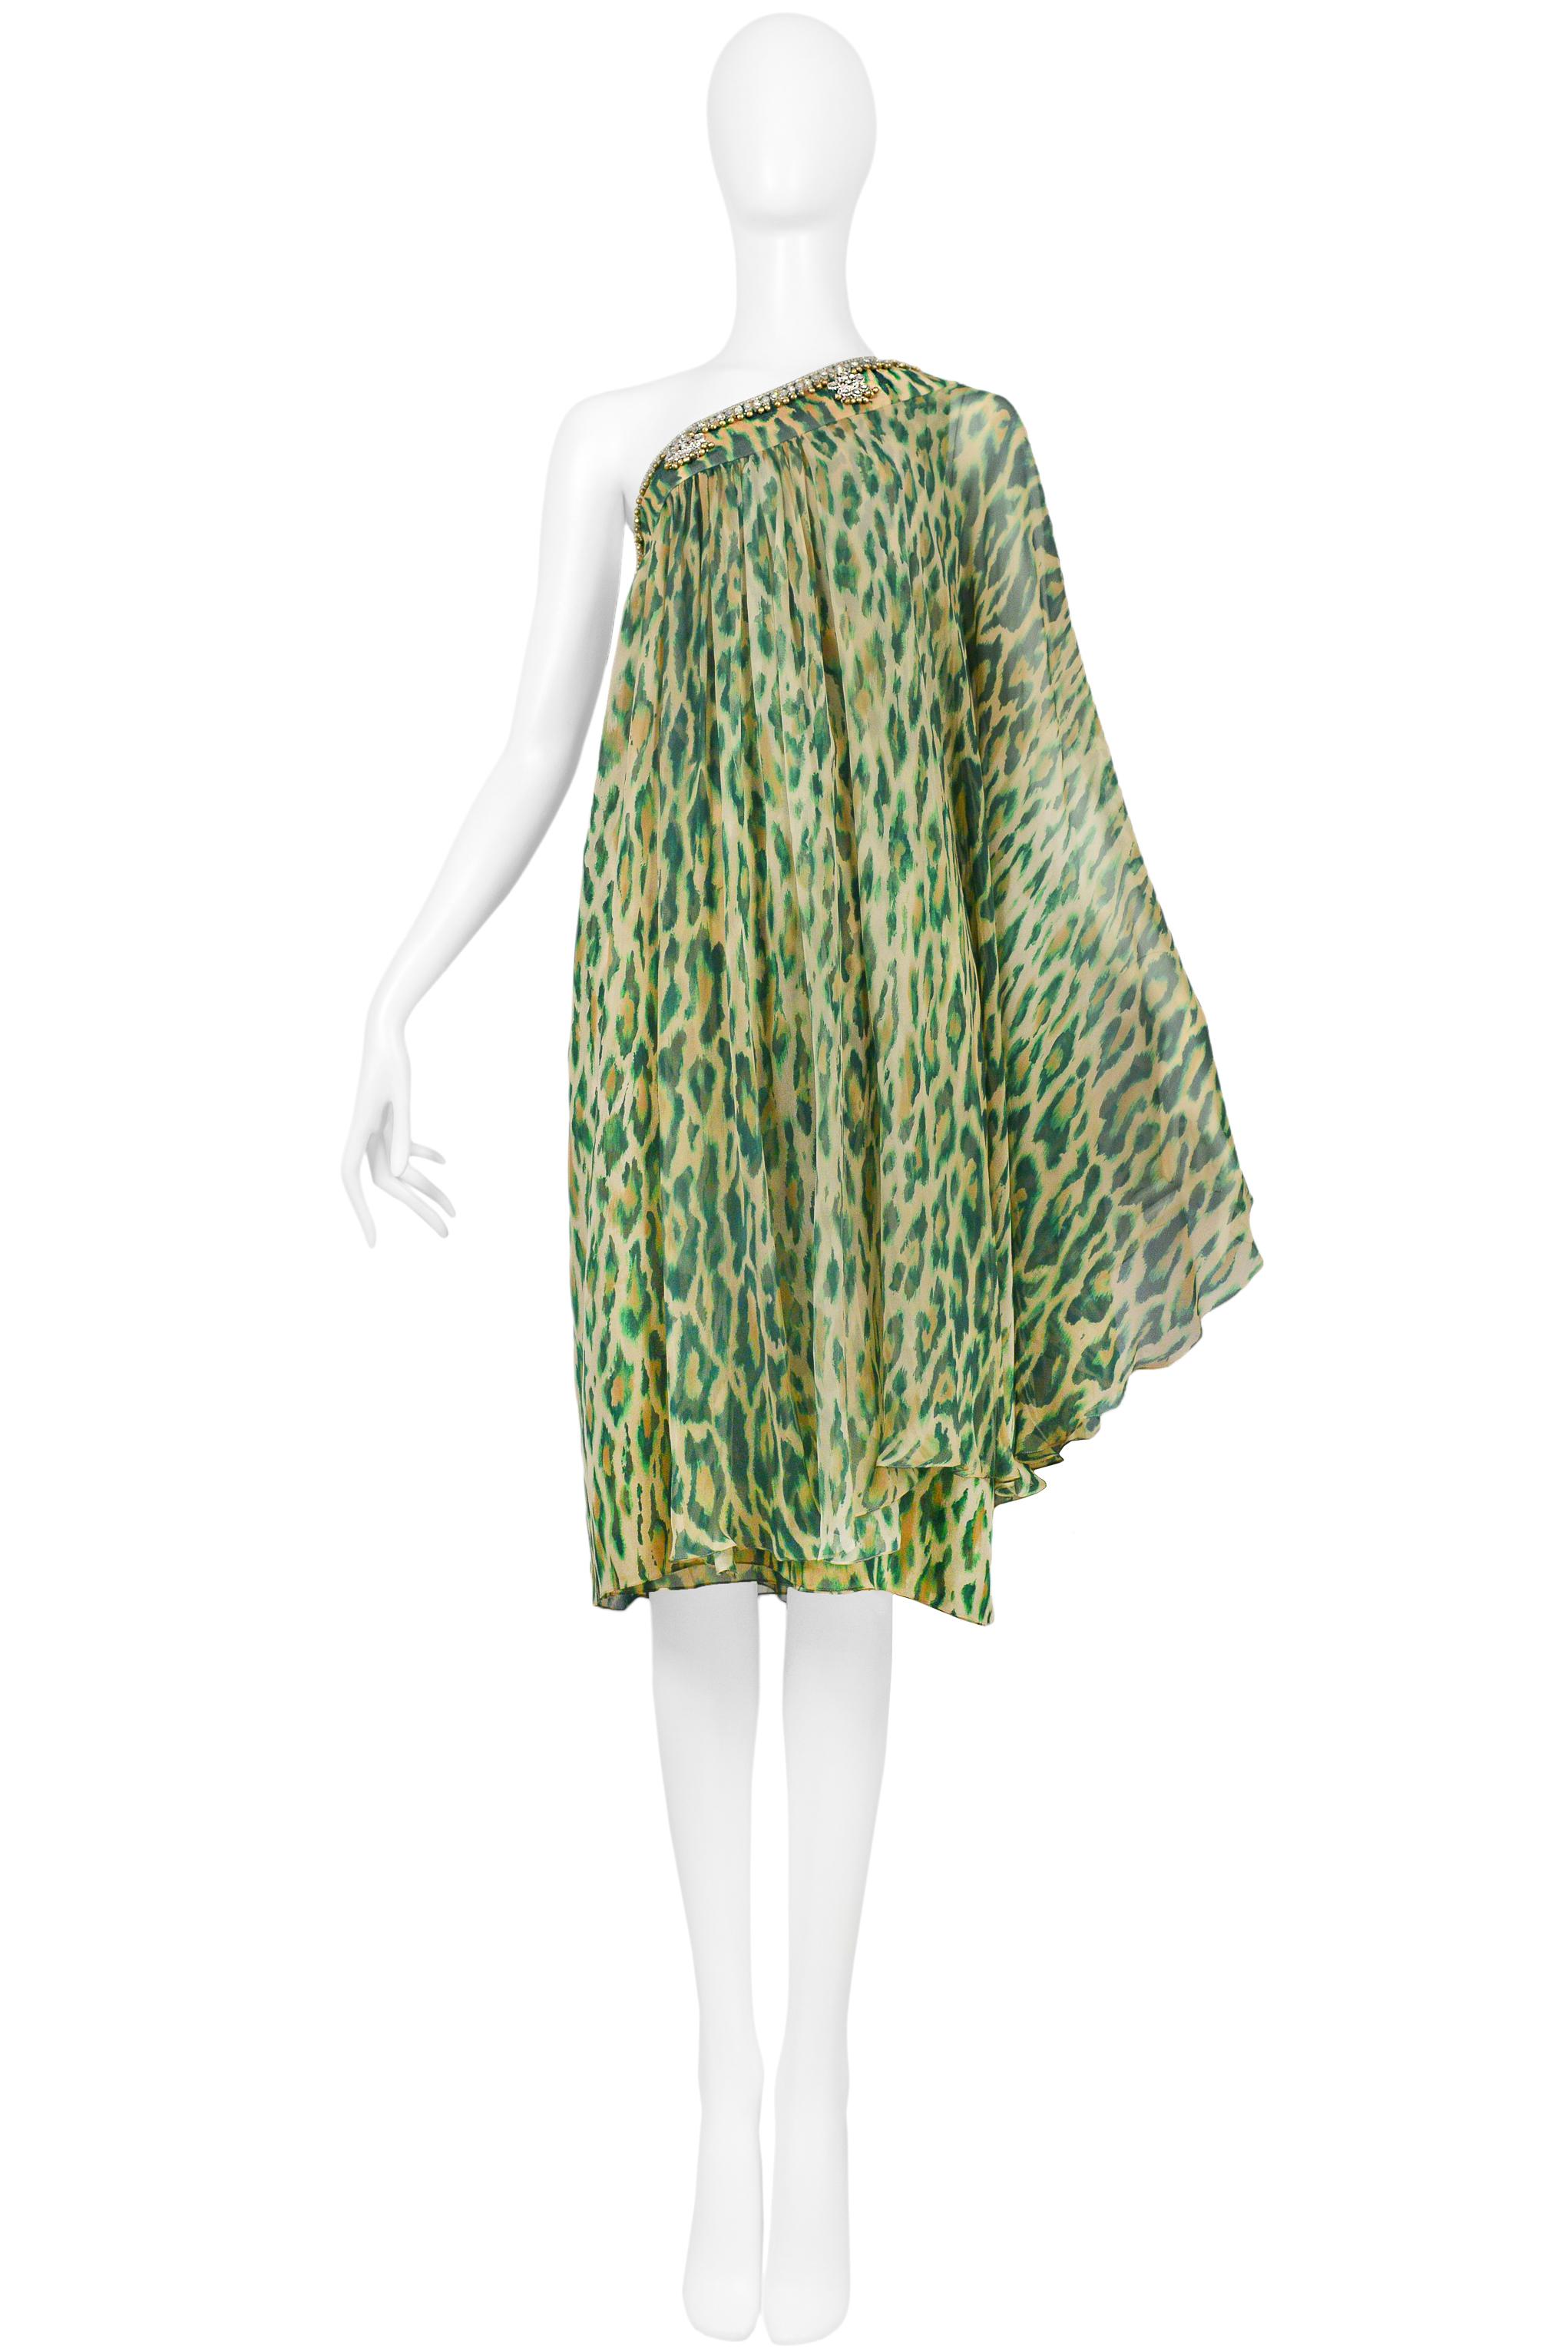 Resurrection is excited to offer a vintage Christian Dior green dress featuring, a leopard print, rhinestones along the top of the dress, a chiffon shoulder overlay, and button closure on the side seam.

Christian Dior Paris
Size 42
100% Silk
2008